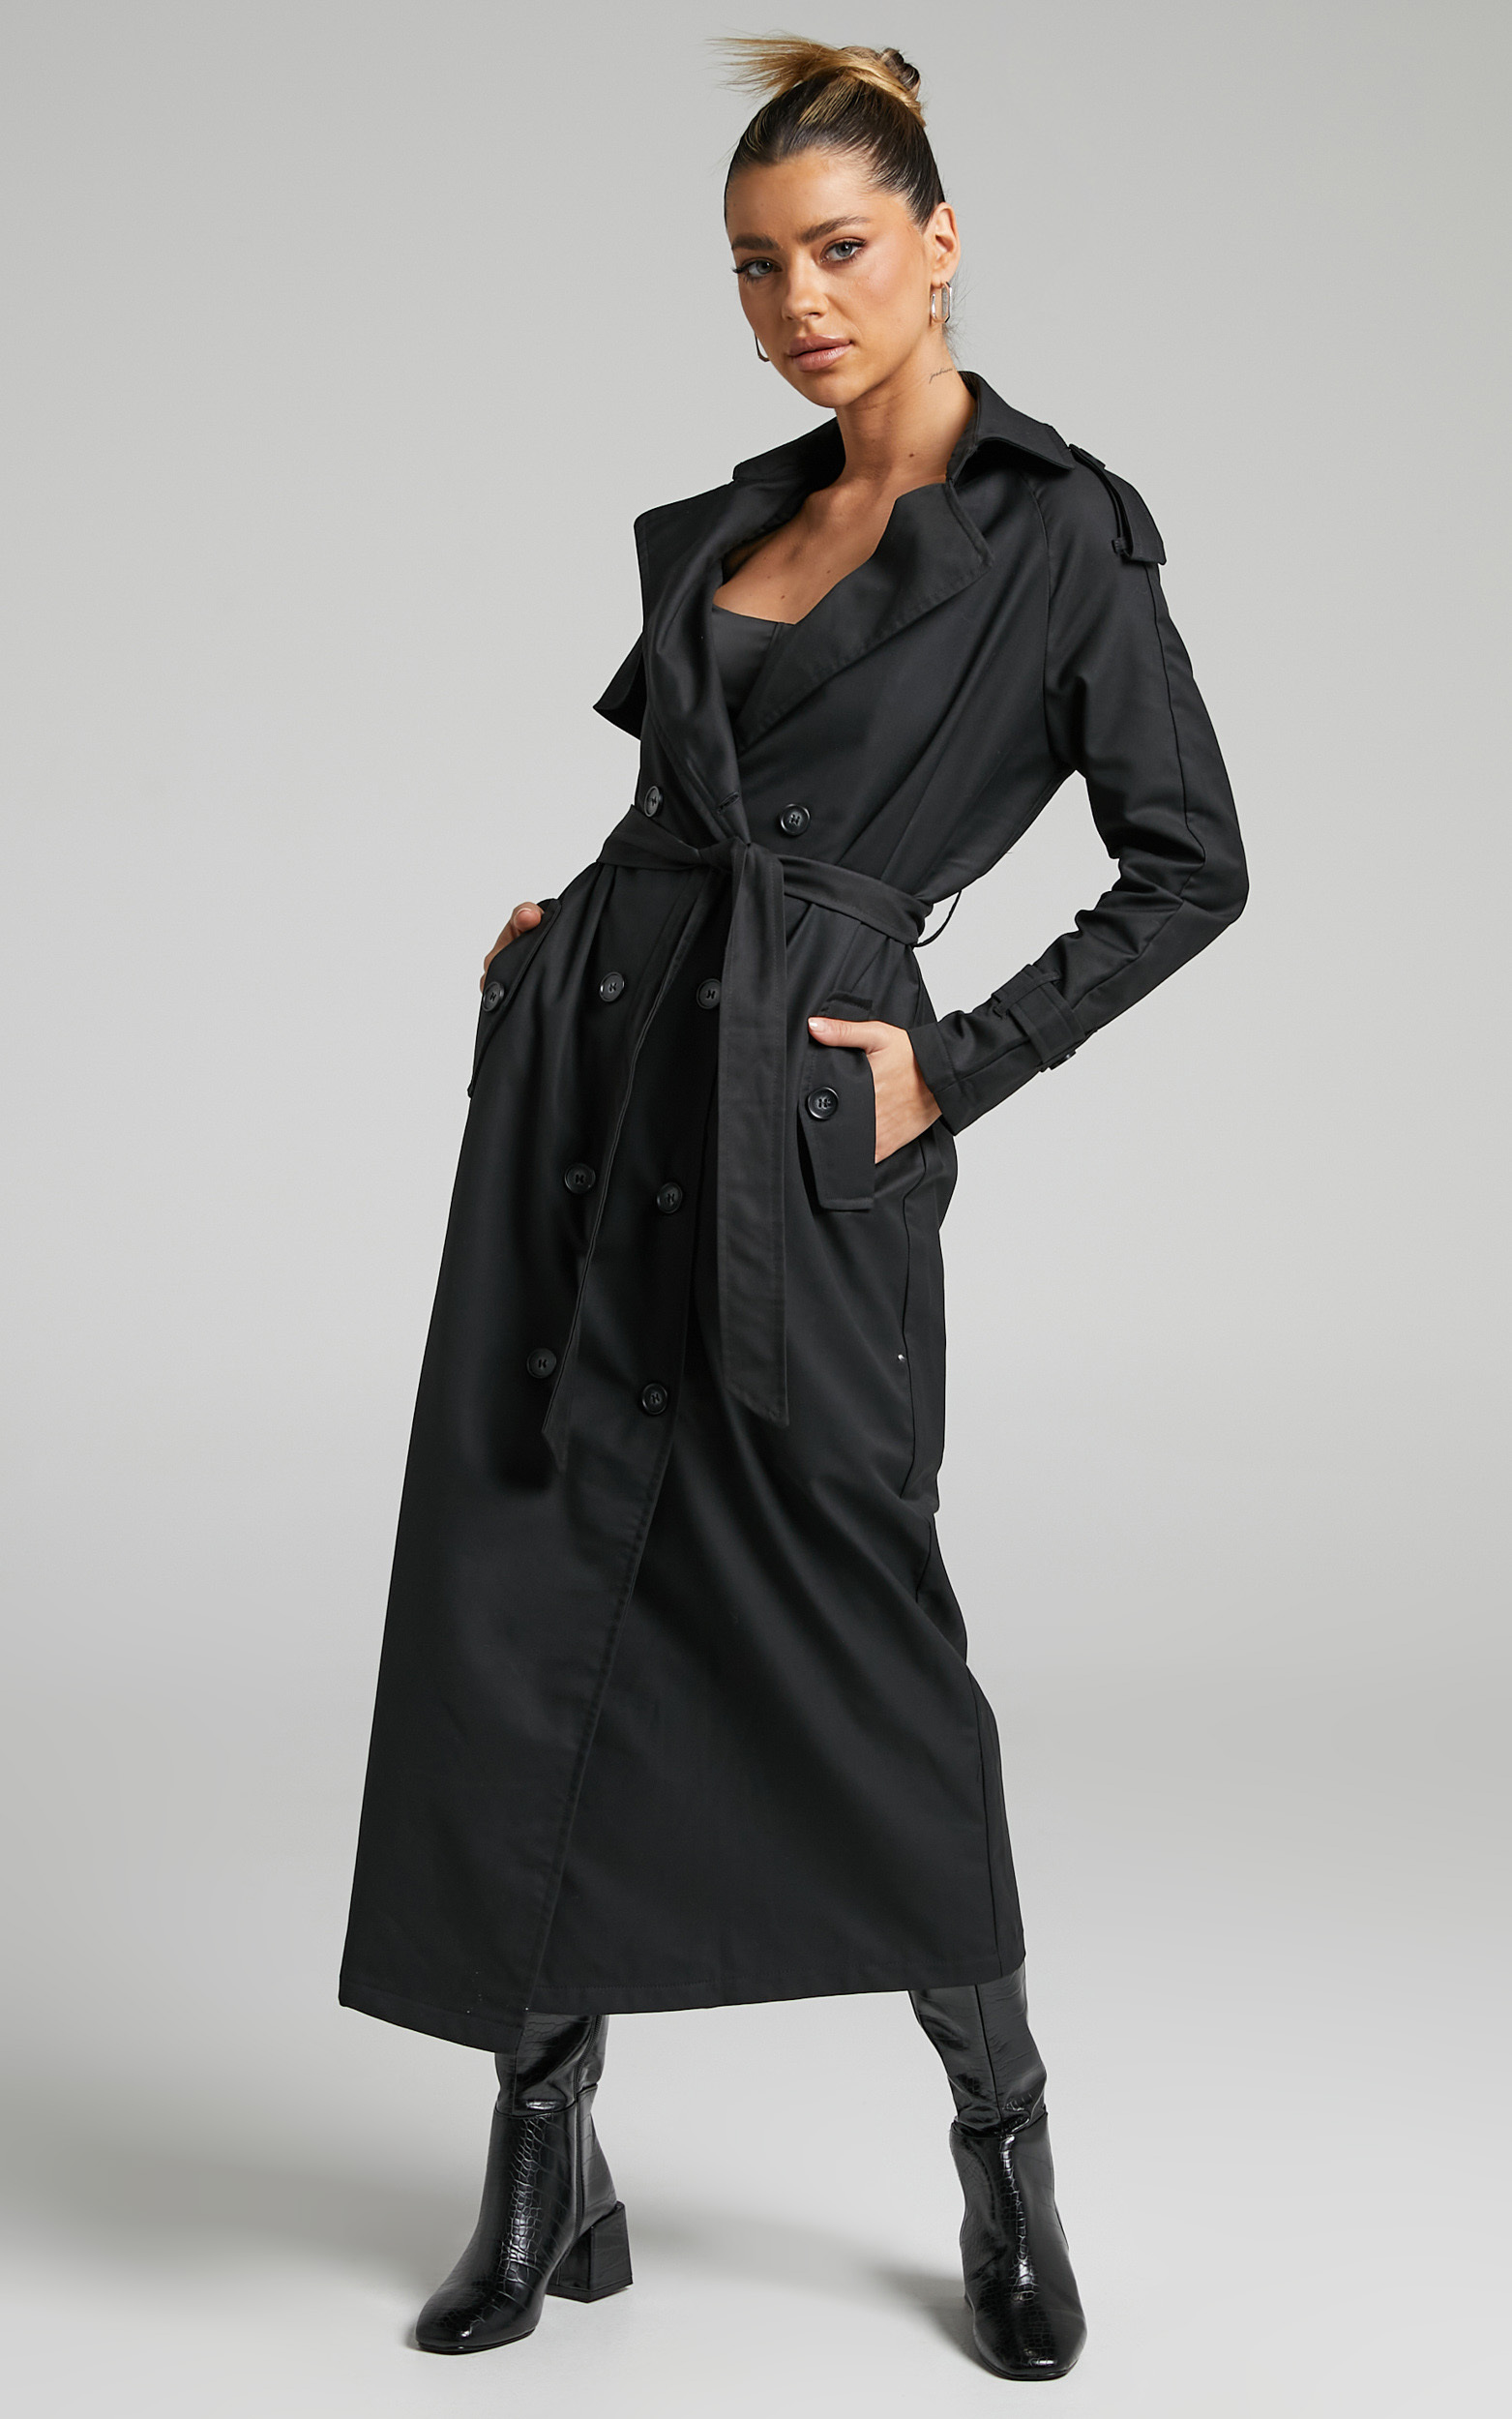 Lioness - Trencherous Coat in Onyx - L, BLK1, hi-res image number null